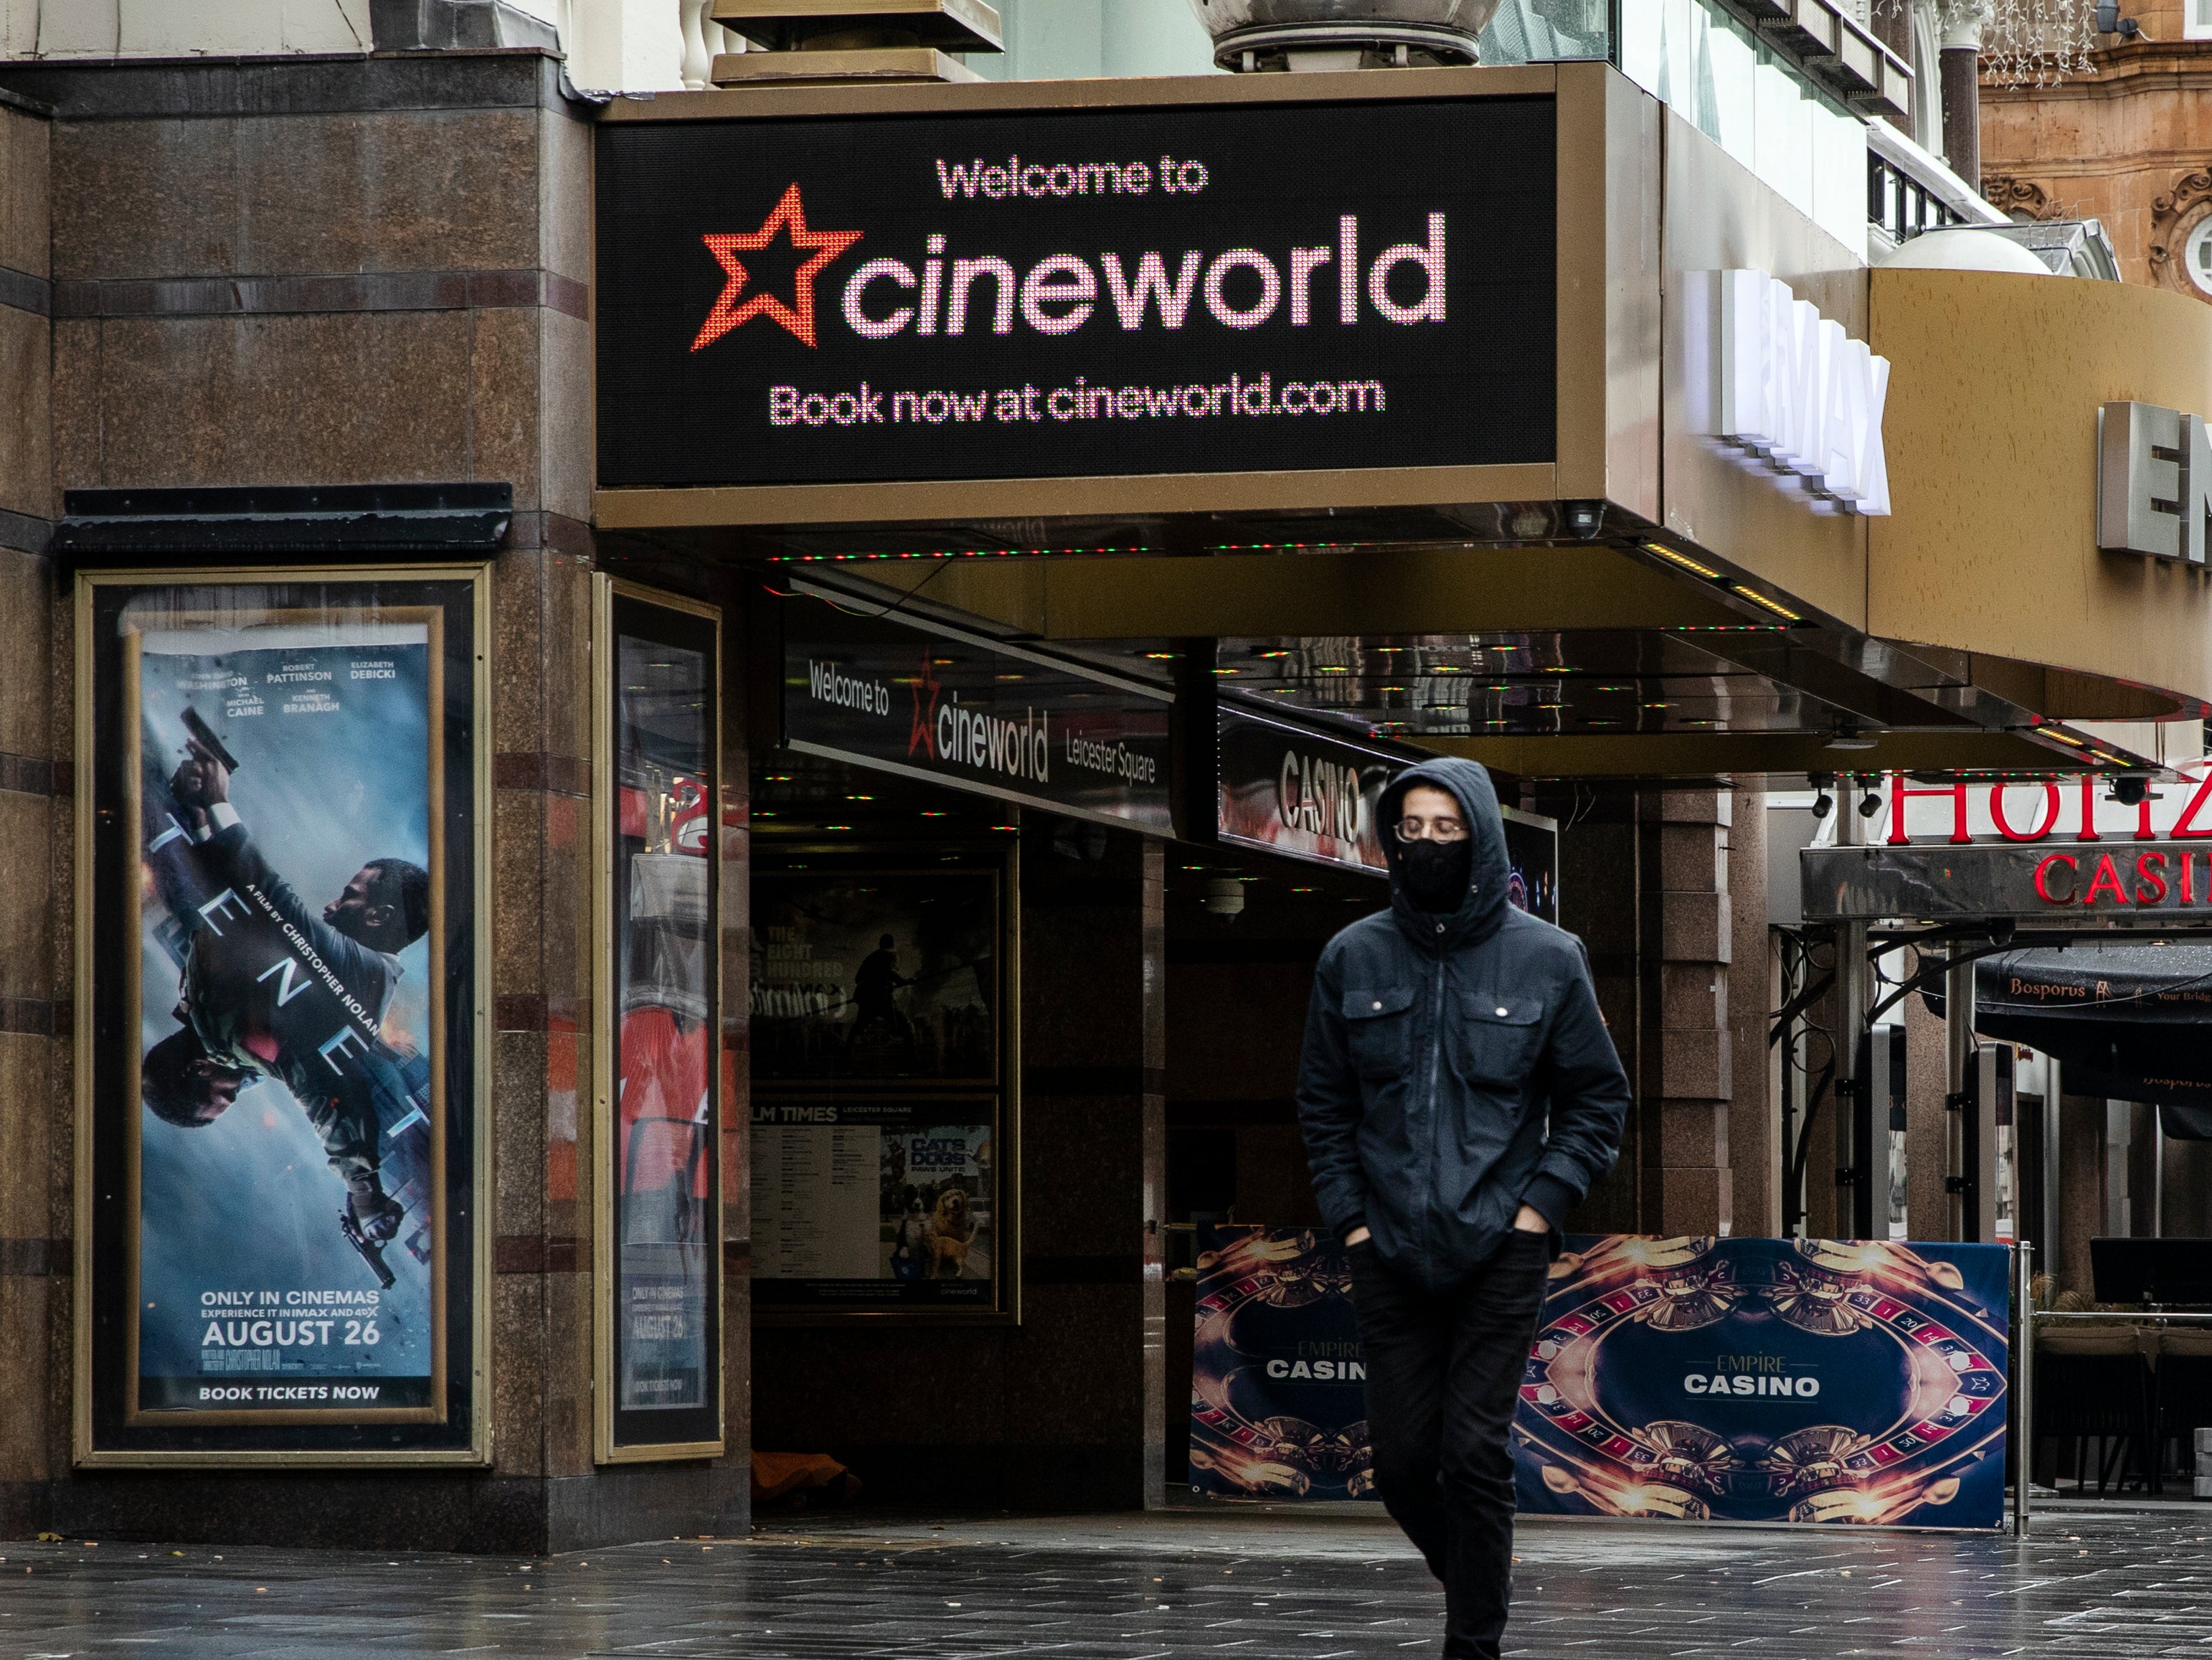 Cineworld’s Leicster Square outlet has been shuttered for months